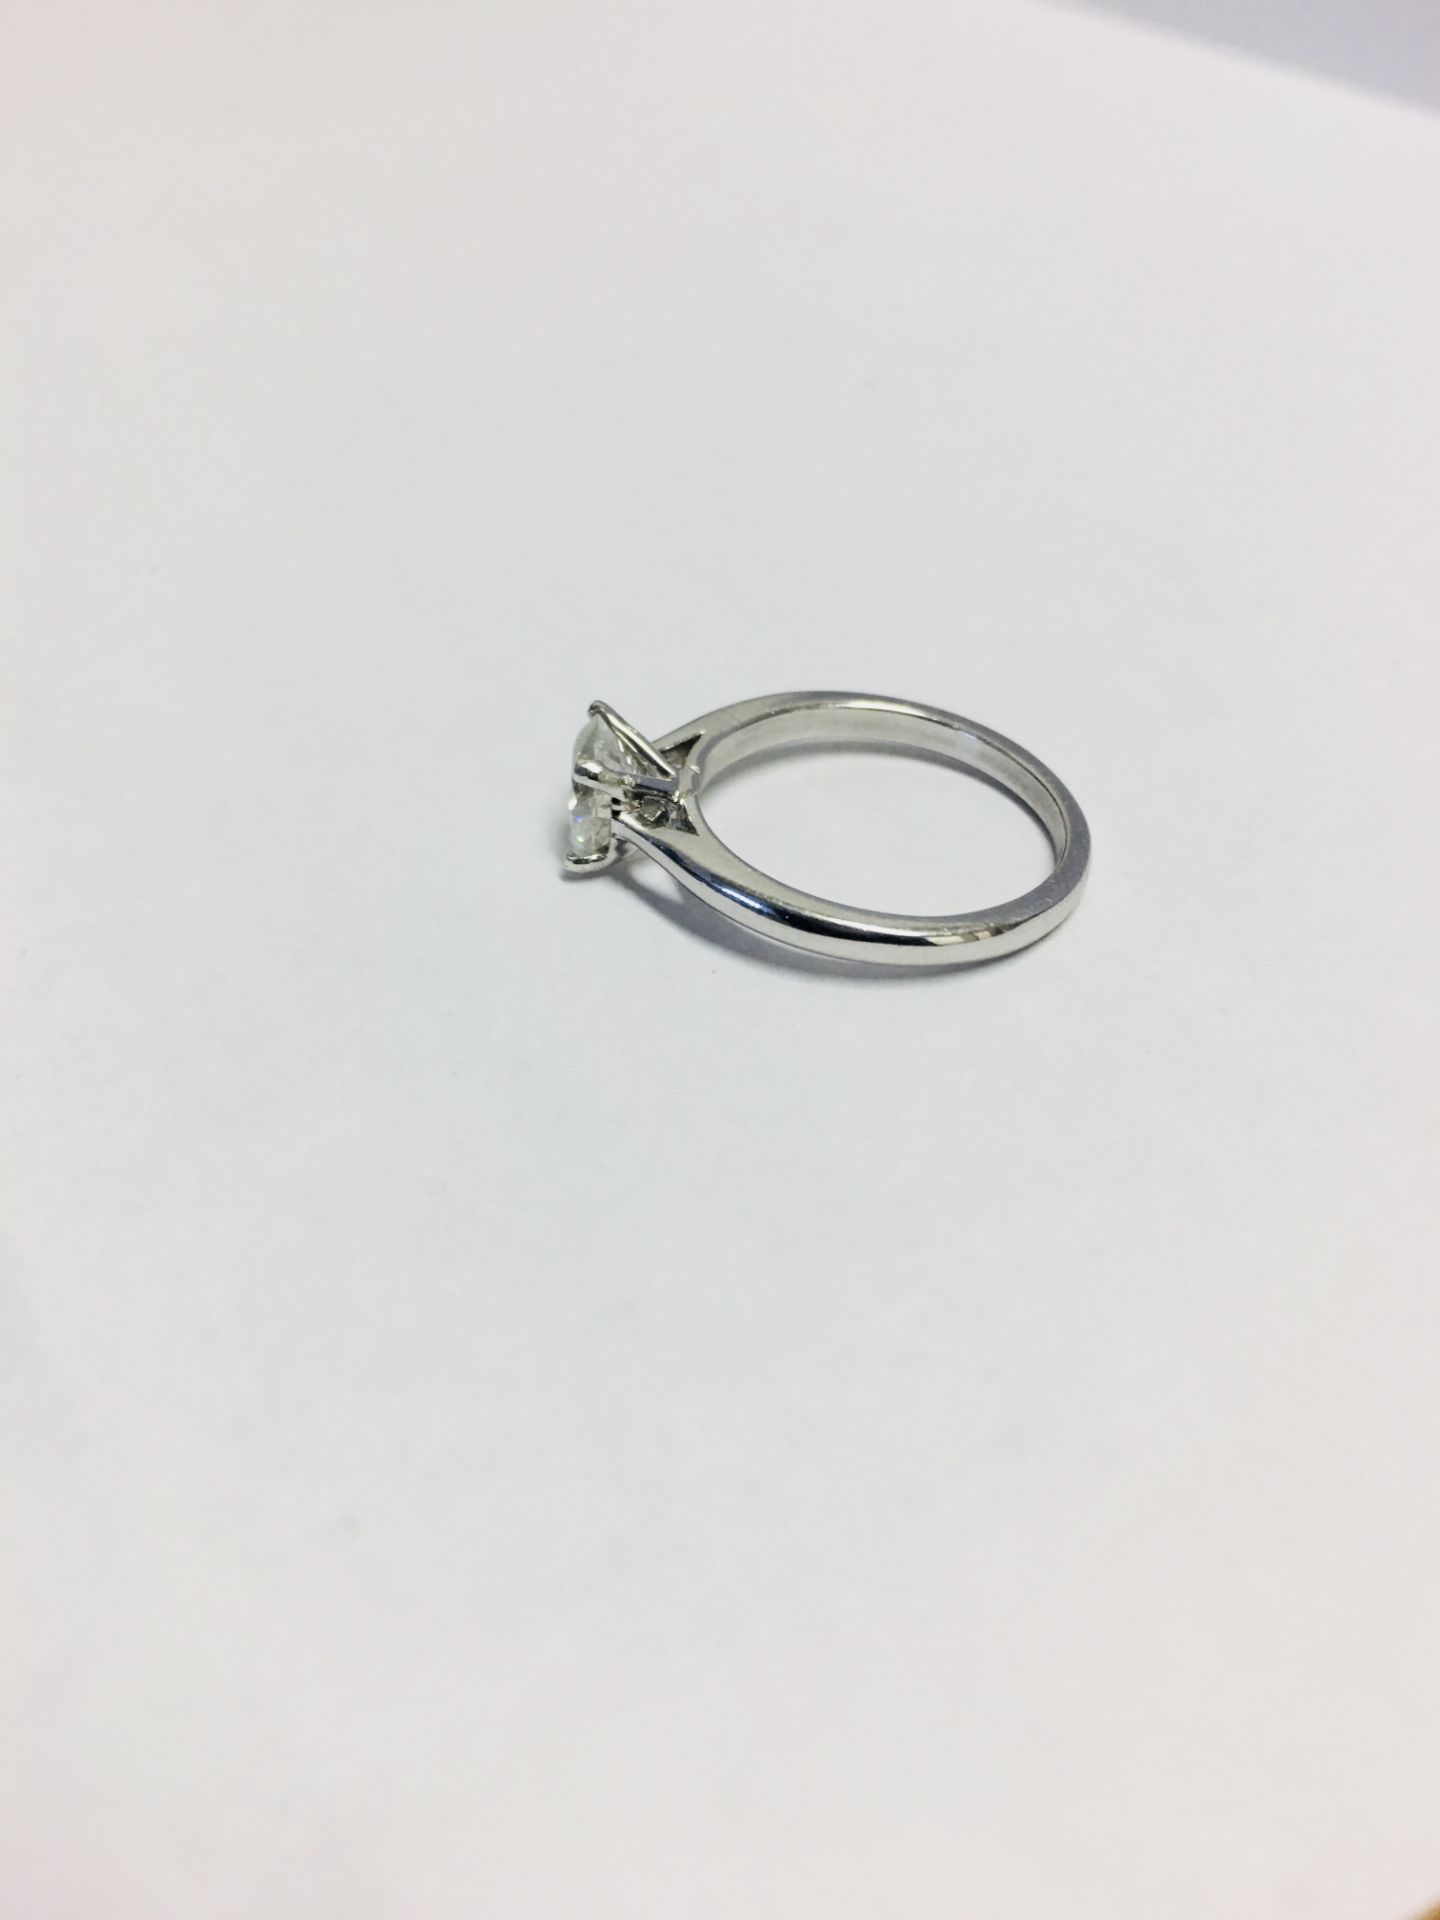 1.01Ct Diamond Solitaire Ring Set In 18Ct White Gold. - Image 3 of 5